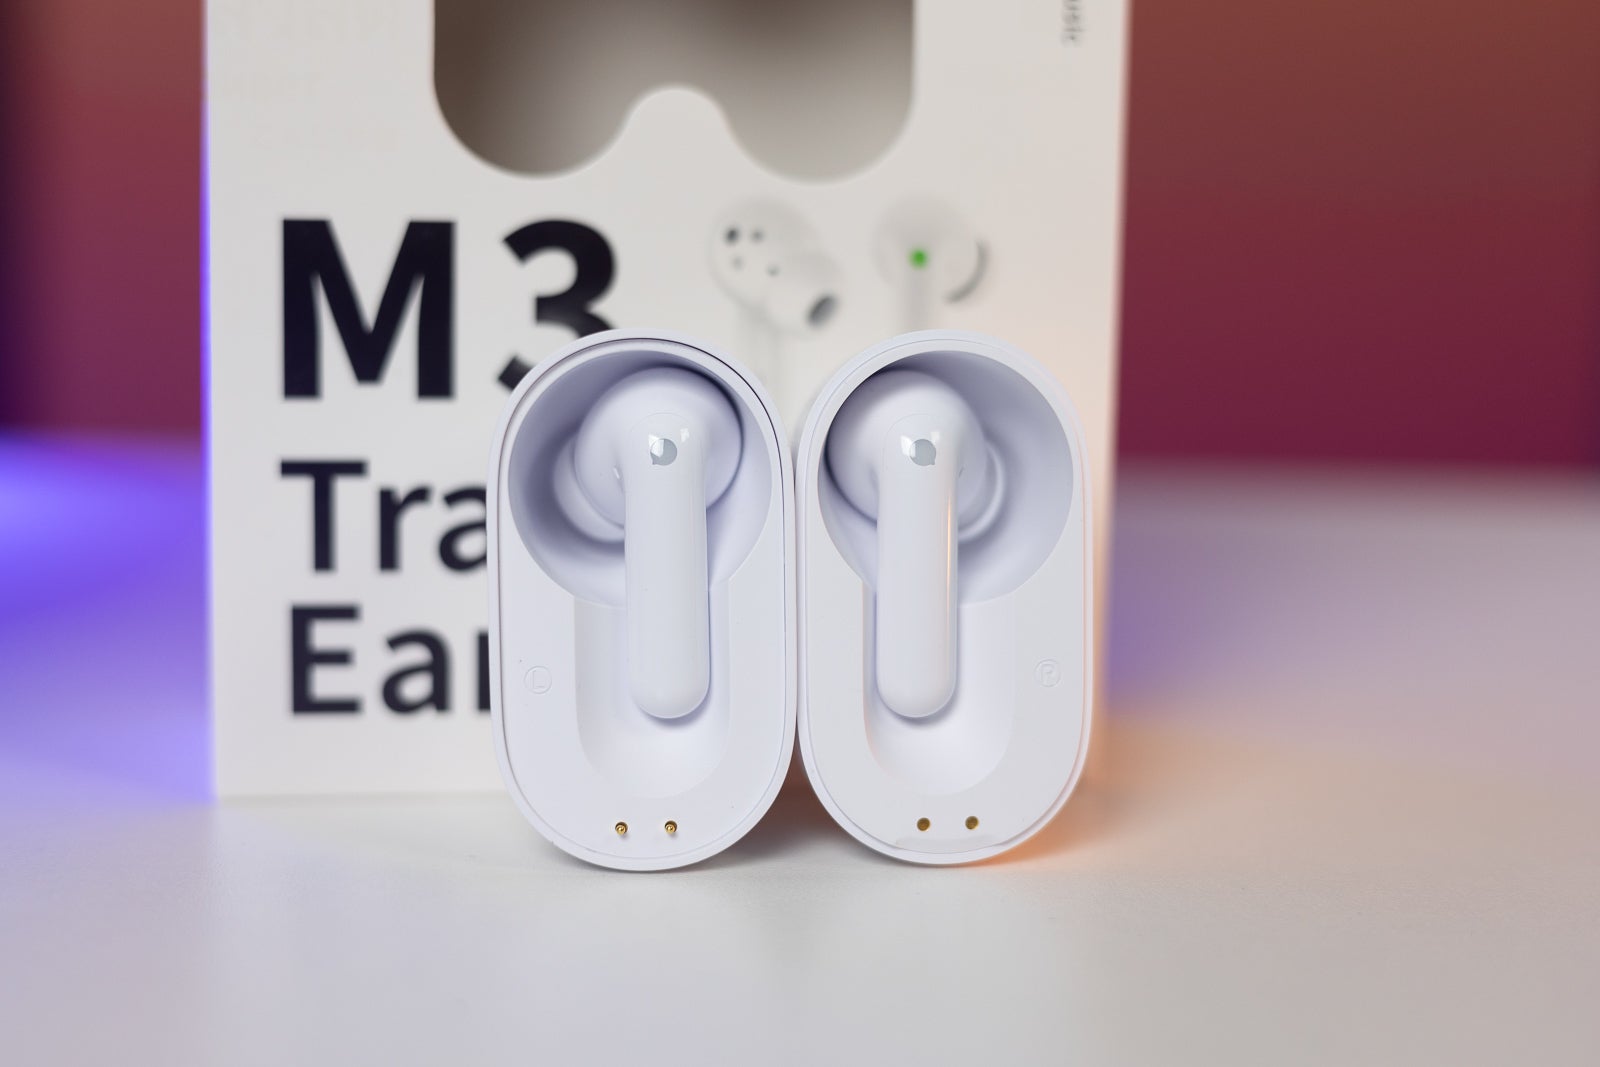 Perfect gift idea for the frequent traveler: Timekettle translator earbuds!